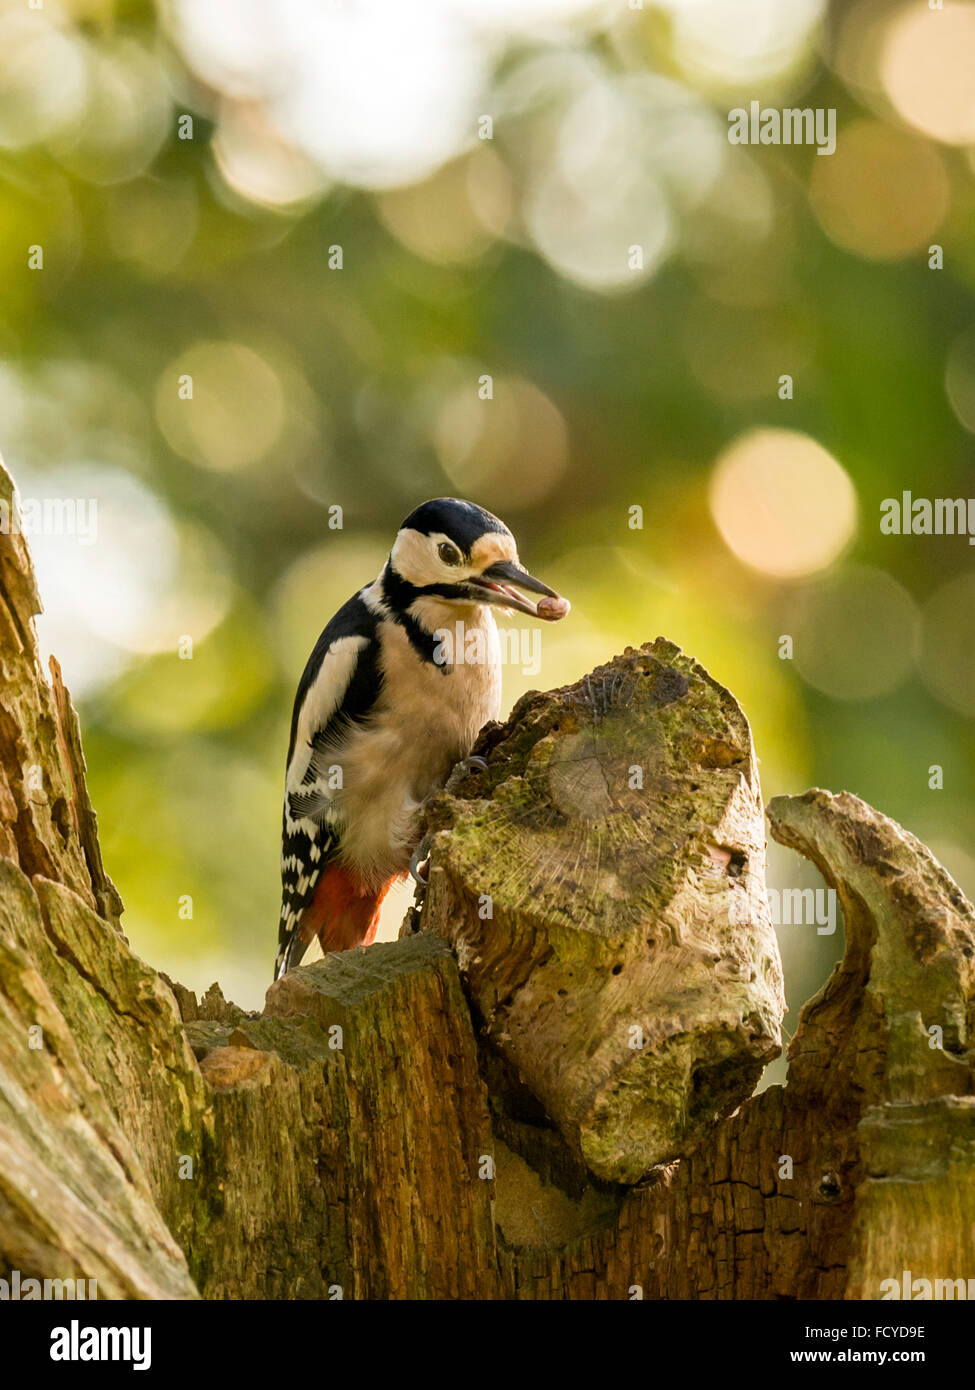 Single Great Spotted Woodpecker (Dendrocopos major) foraging in a natural woodland countryside setting. 'Presenting a peanut' Stock Photo